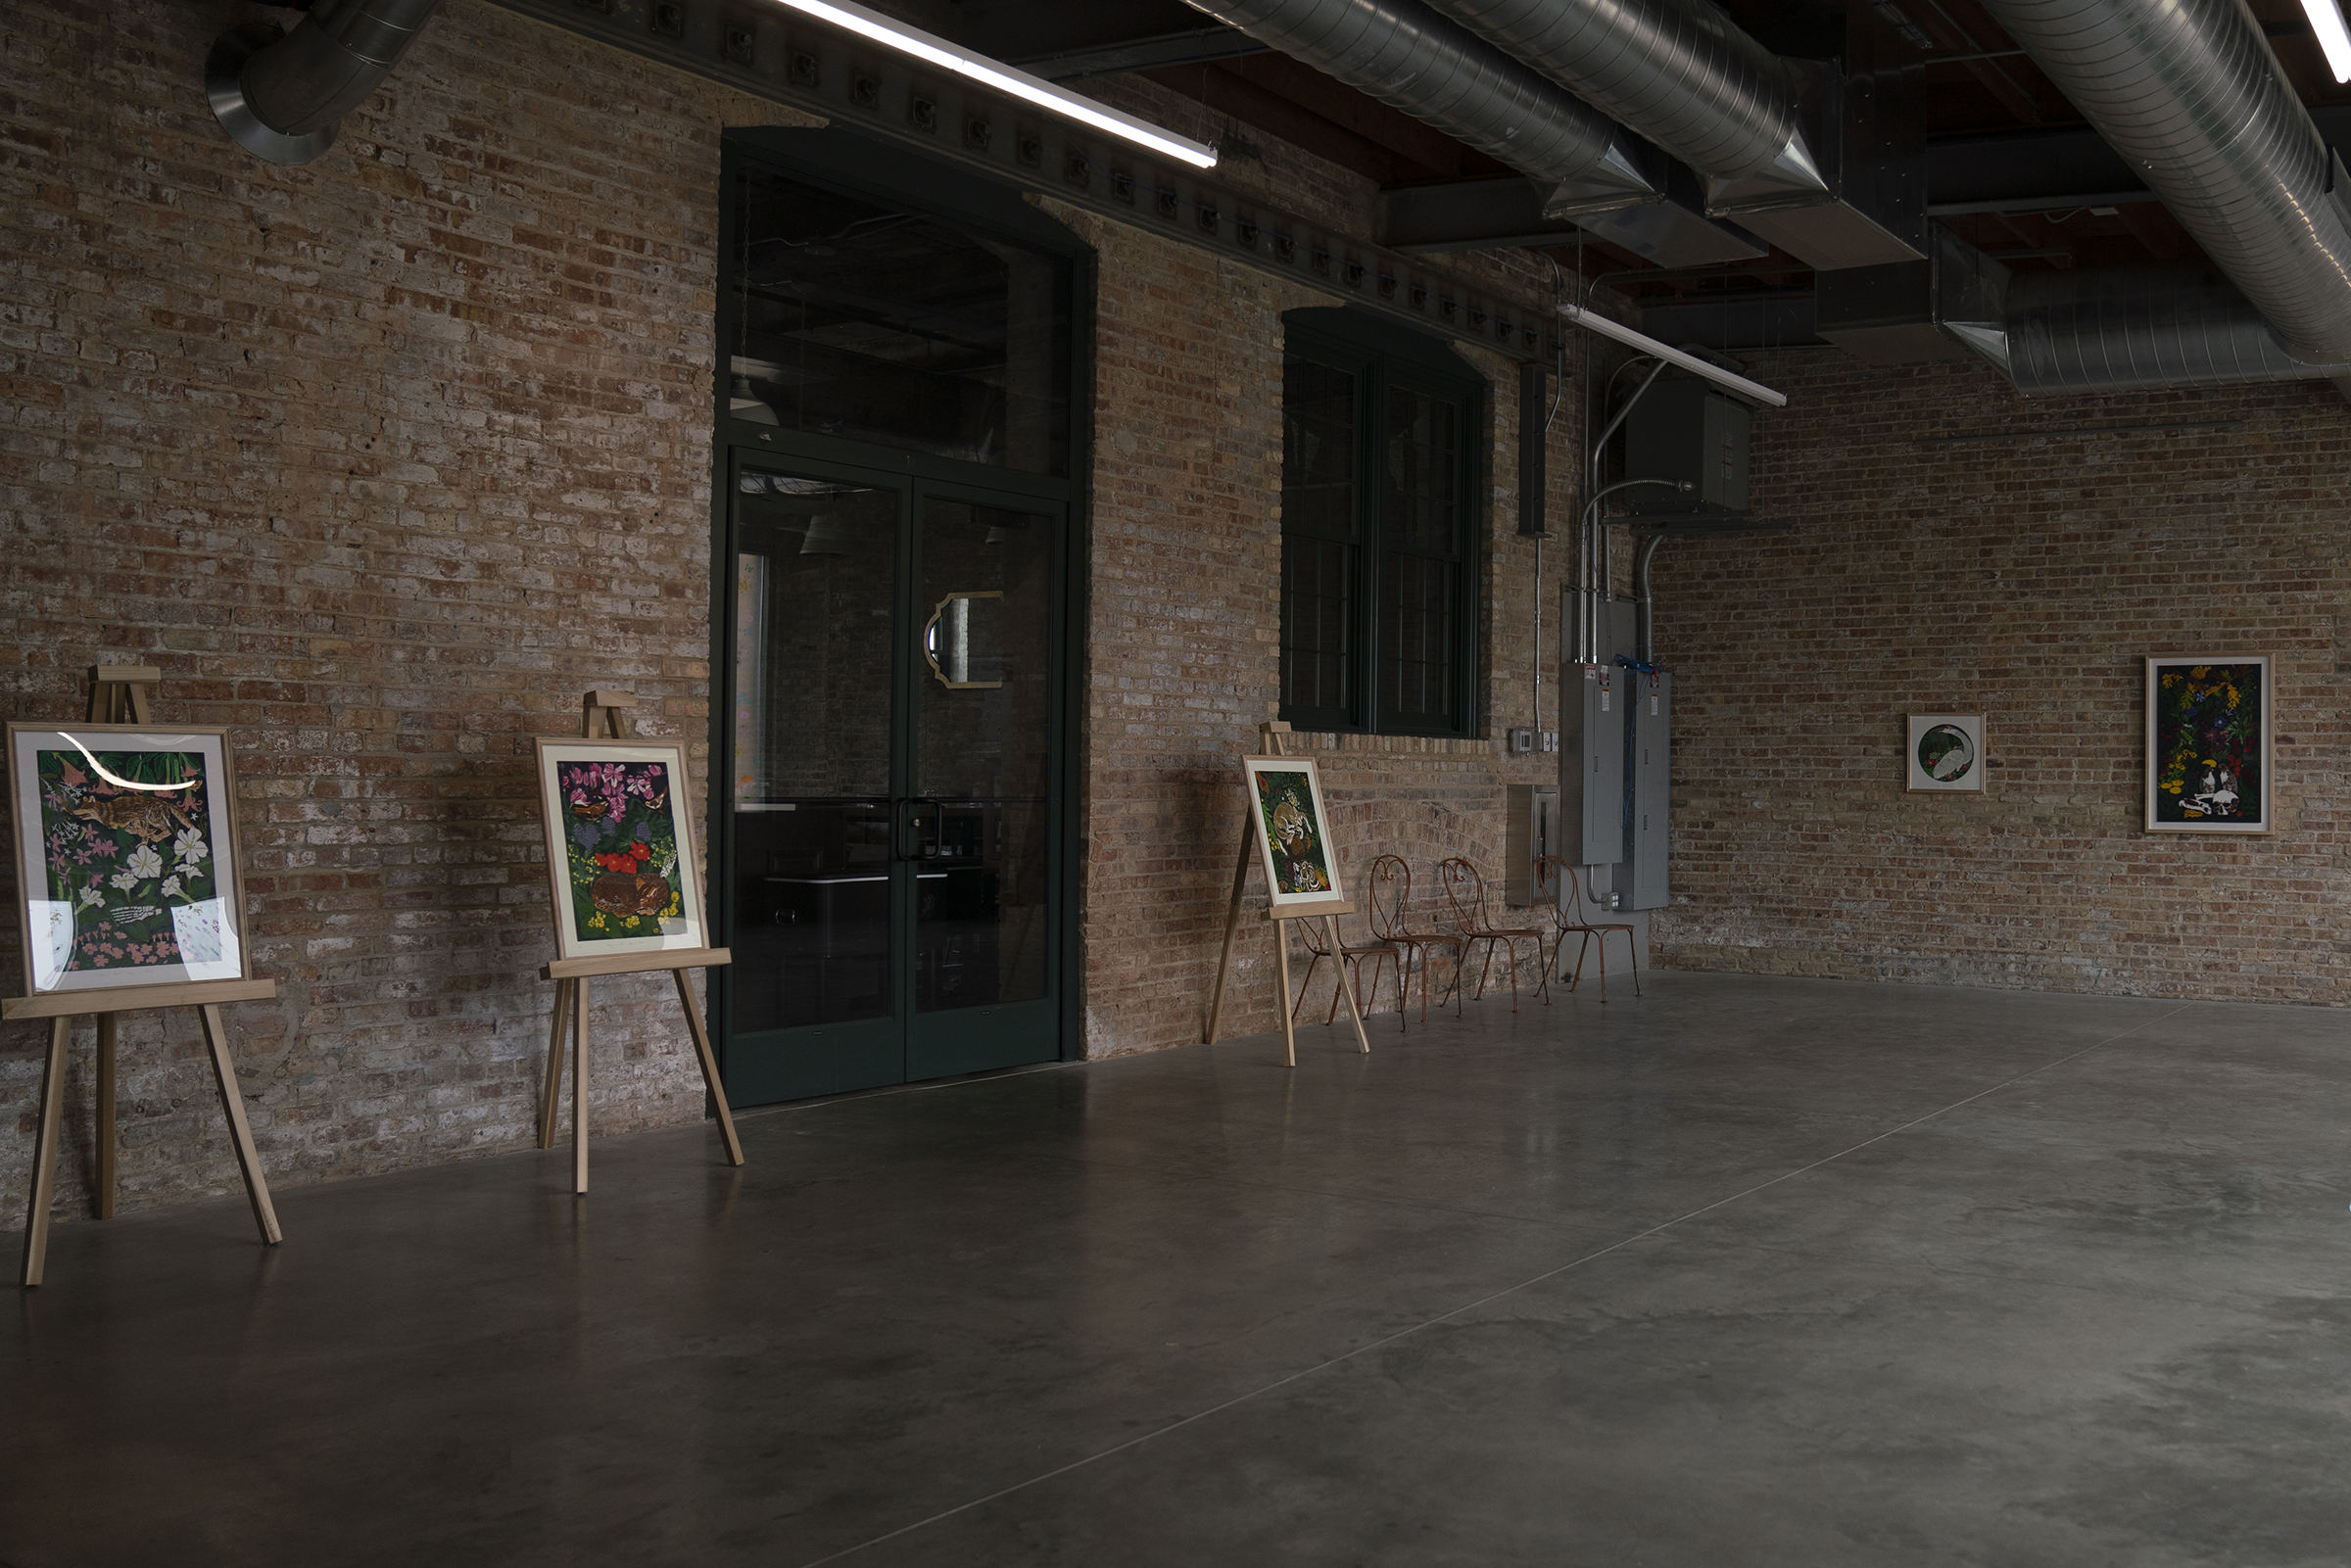 Installation view of MAGIC IS ALIVE, DOG IS AFOOT Master of Fine Arts Exhibition by Lesley Anne Numbers at Garver Feed Mill.